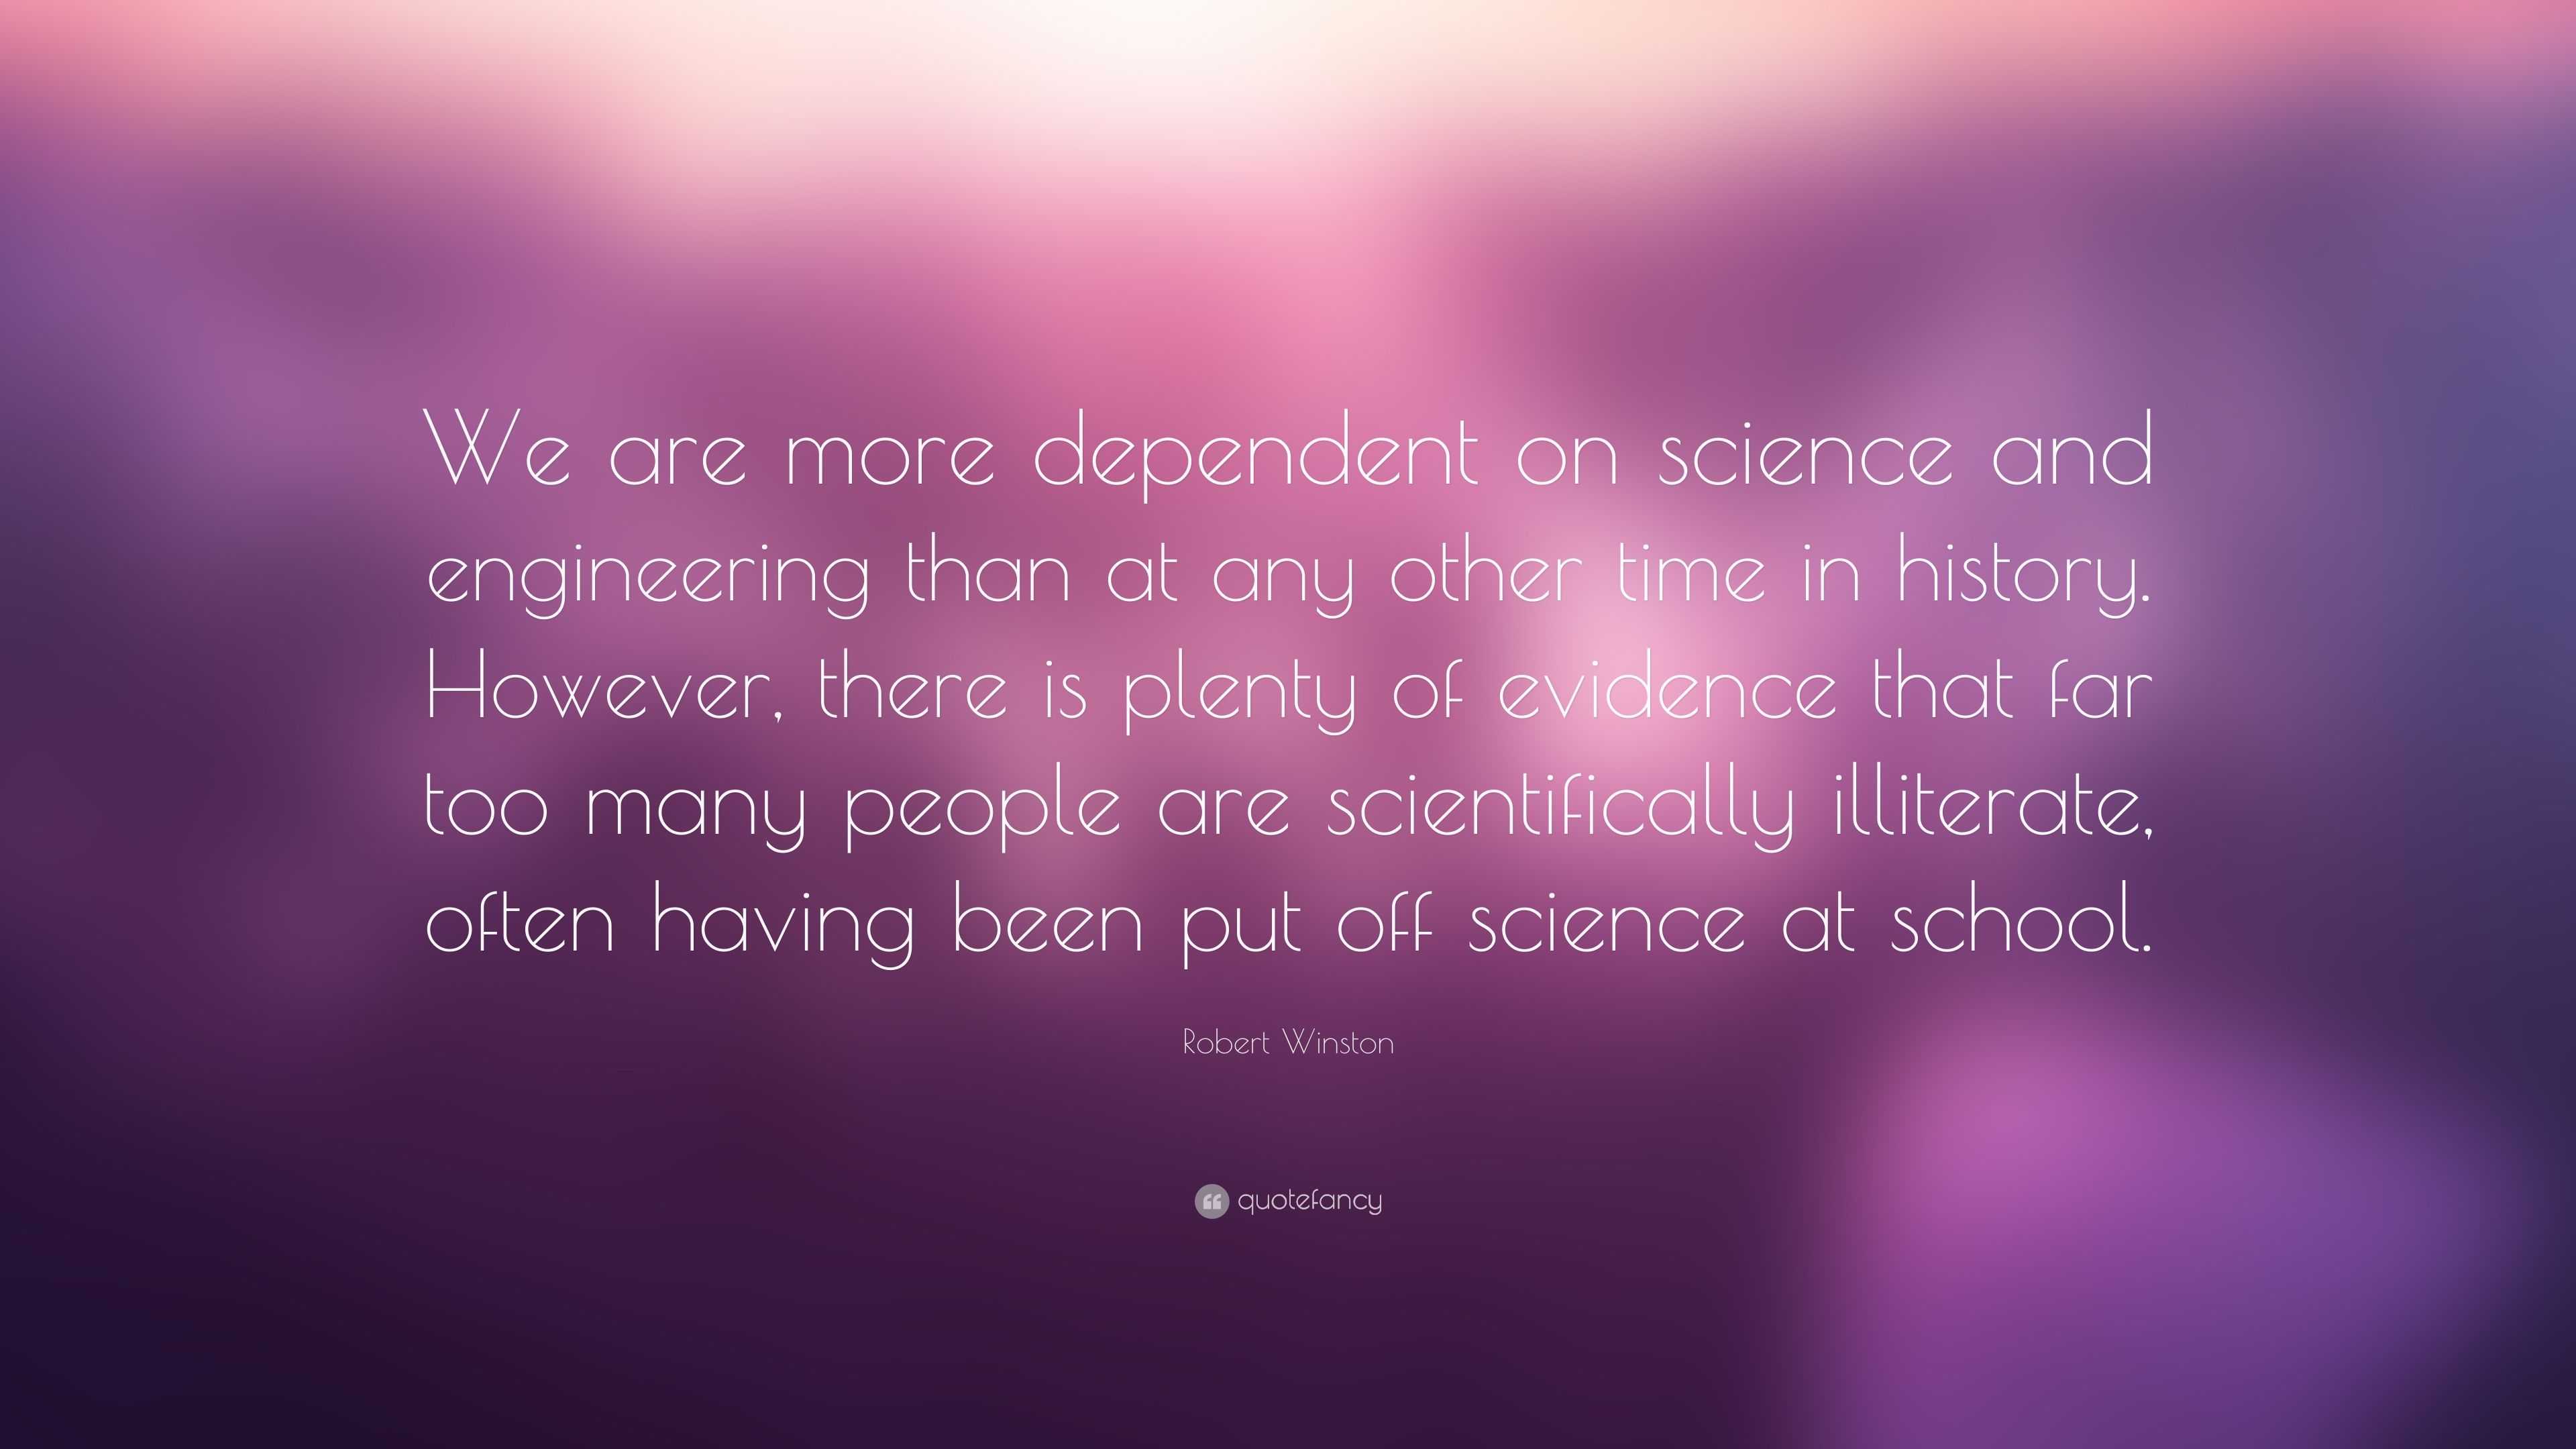 Robert Winston Quote: “We are more dependent on science and engineering